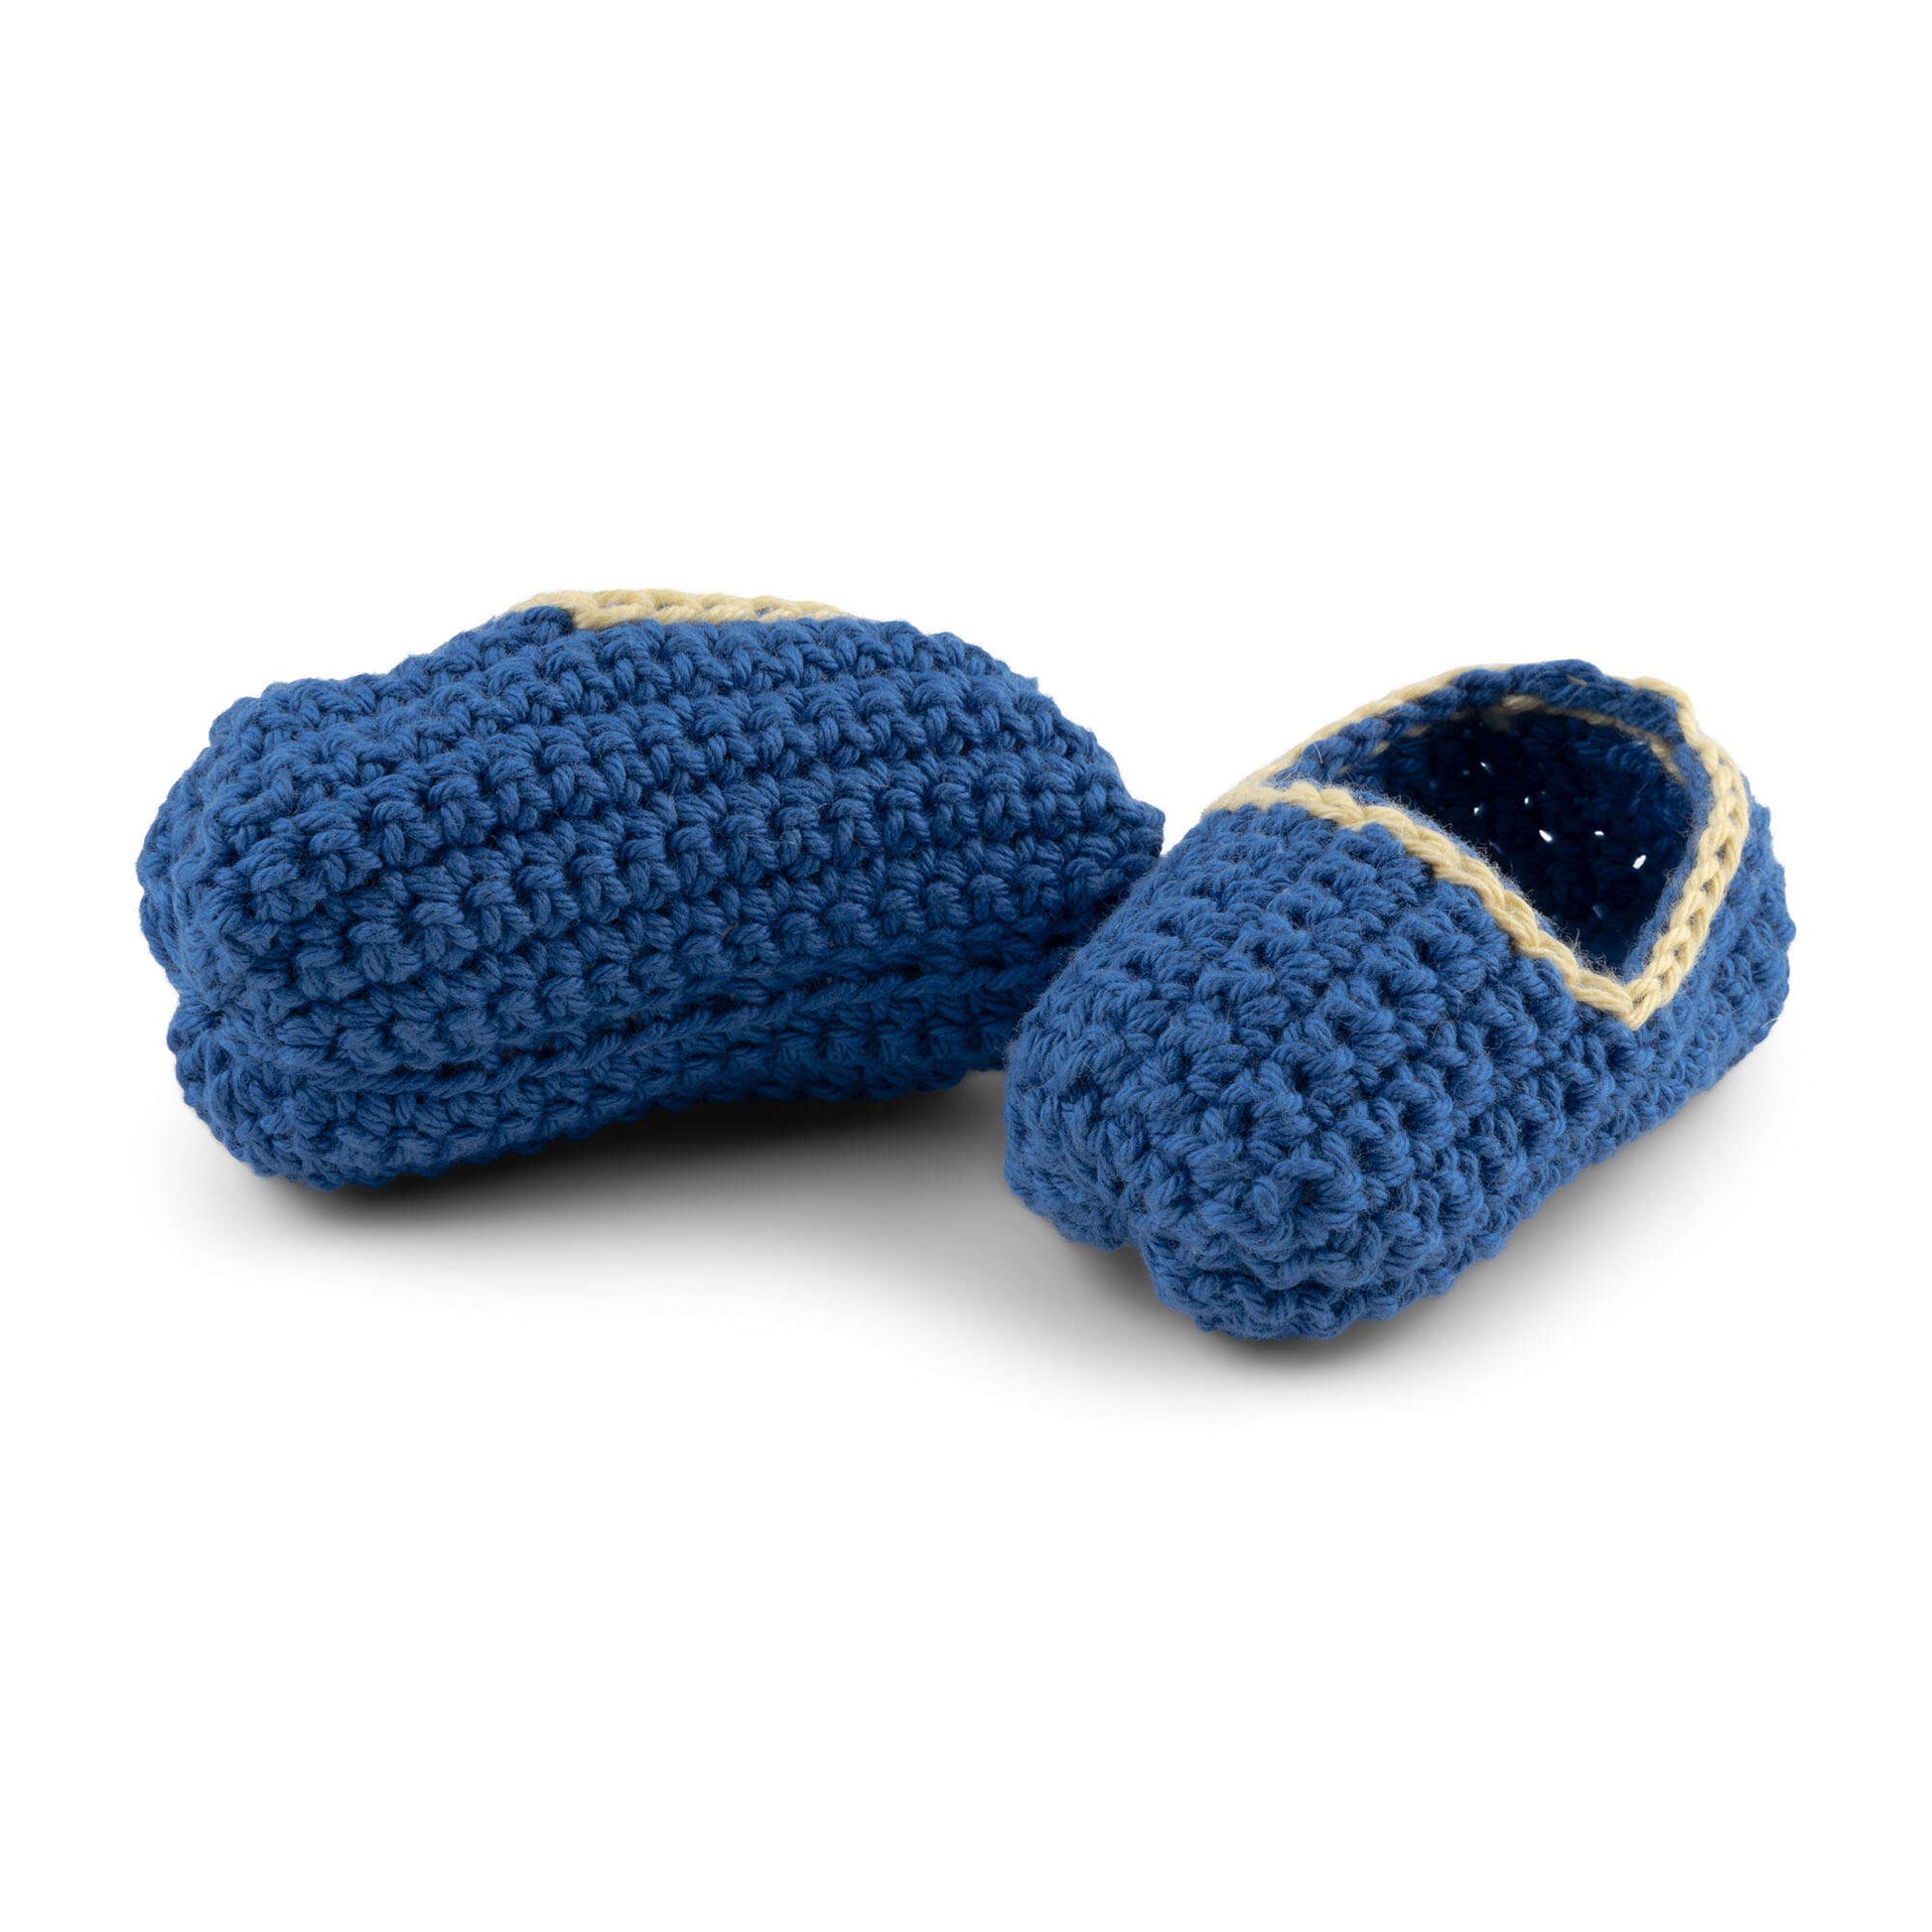 Free Aunt Lydia's Flat Booties With Stitch Trim Crochet Pattern